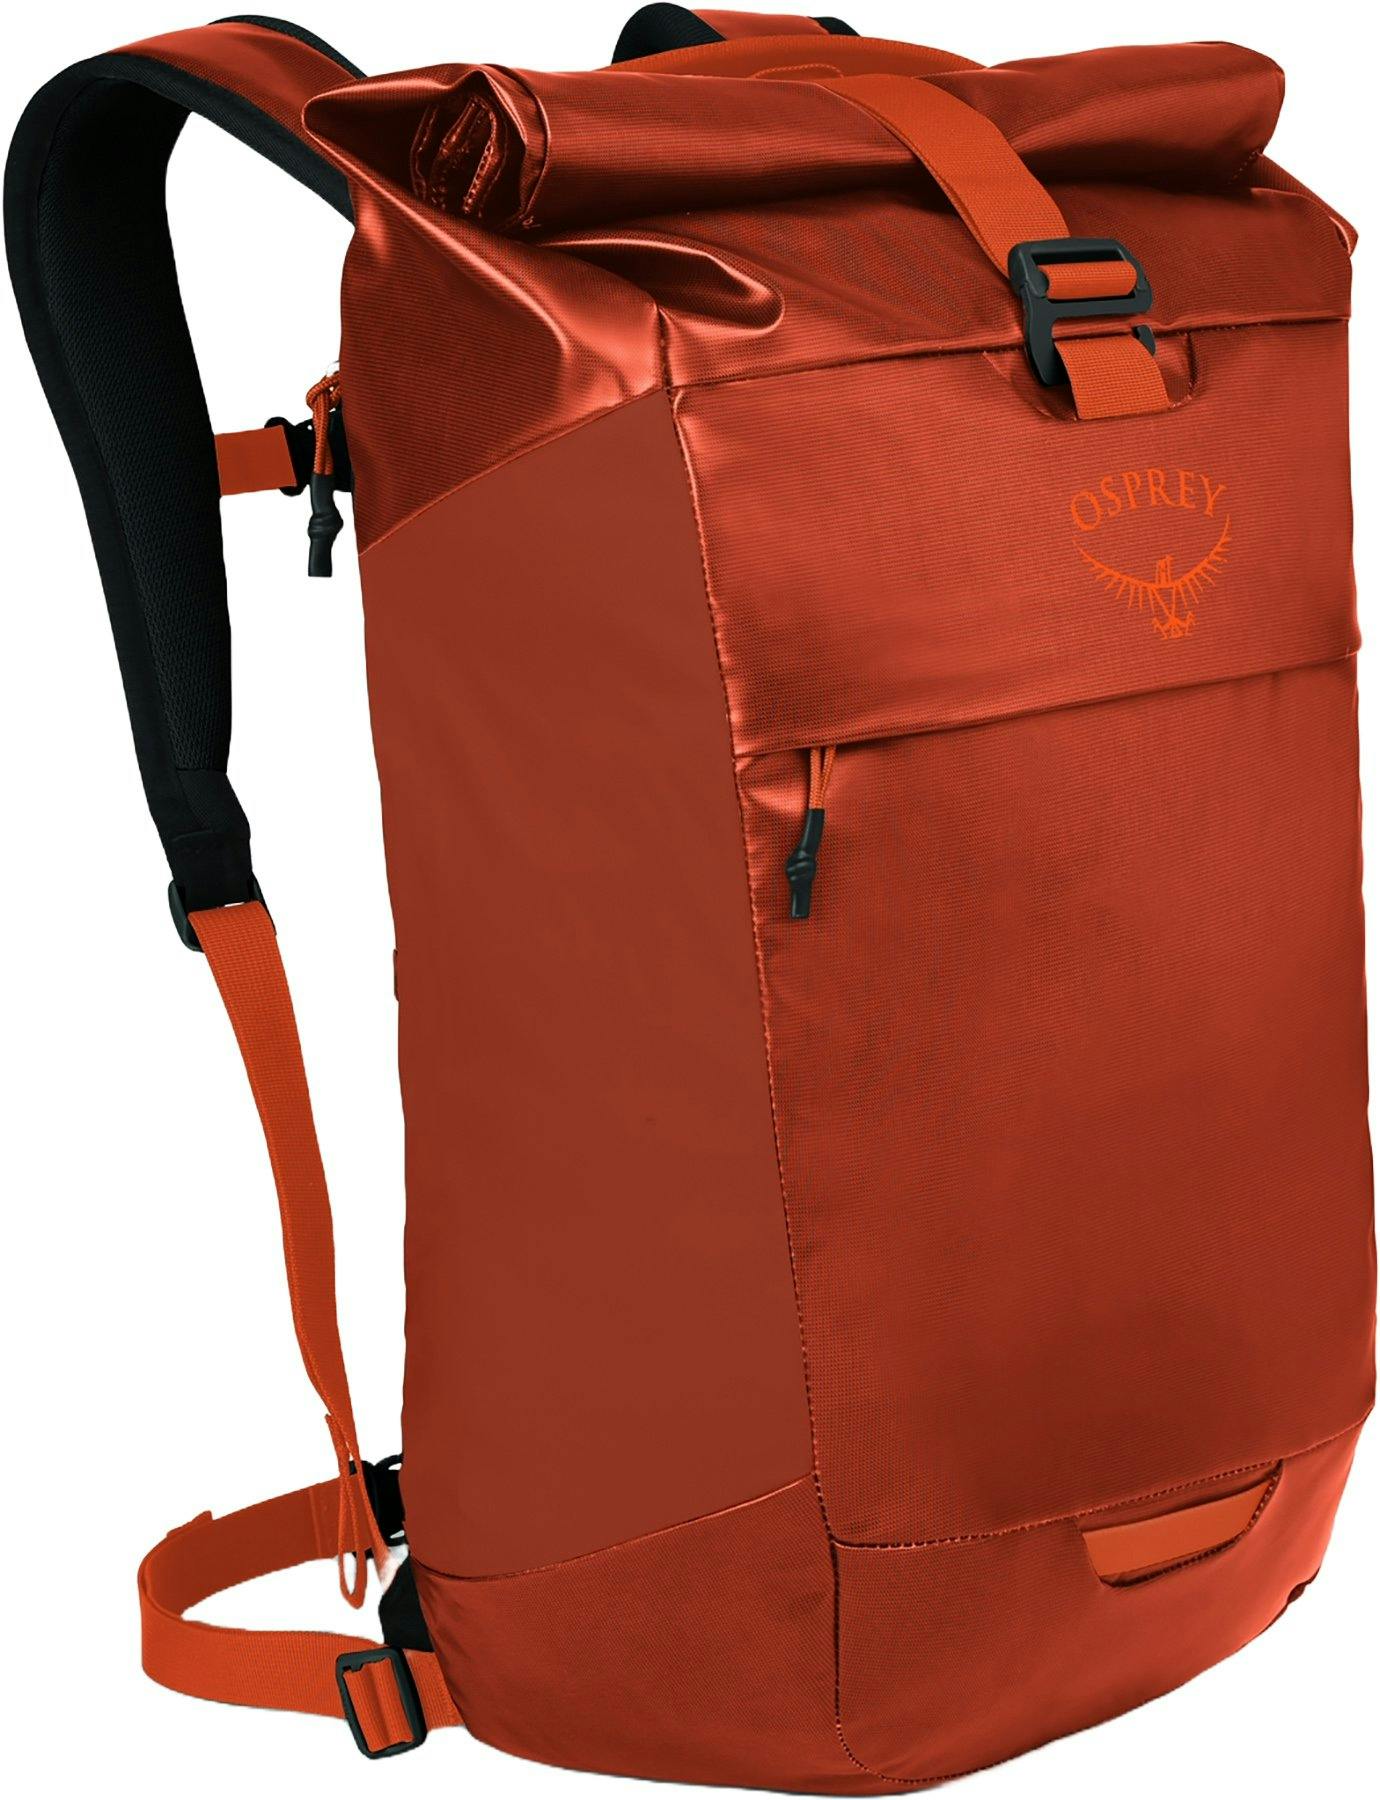 Product image for Transporter Roll Top Backpack 28L